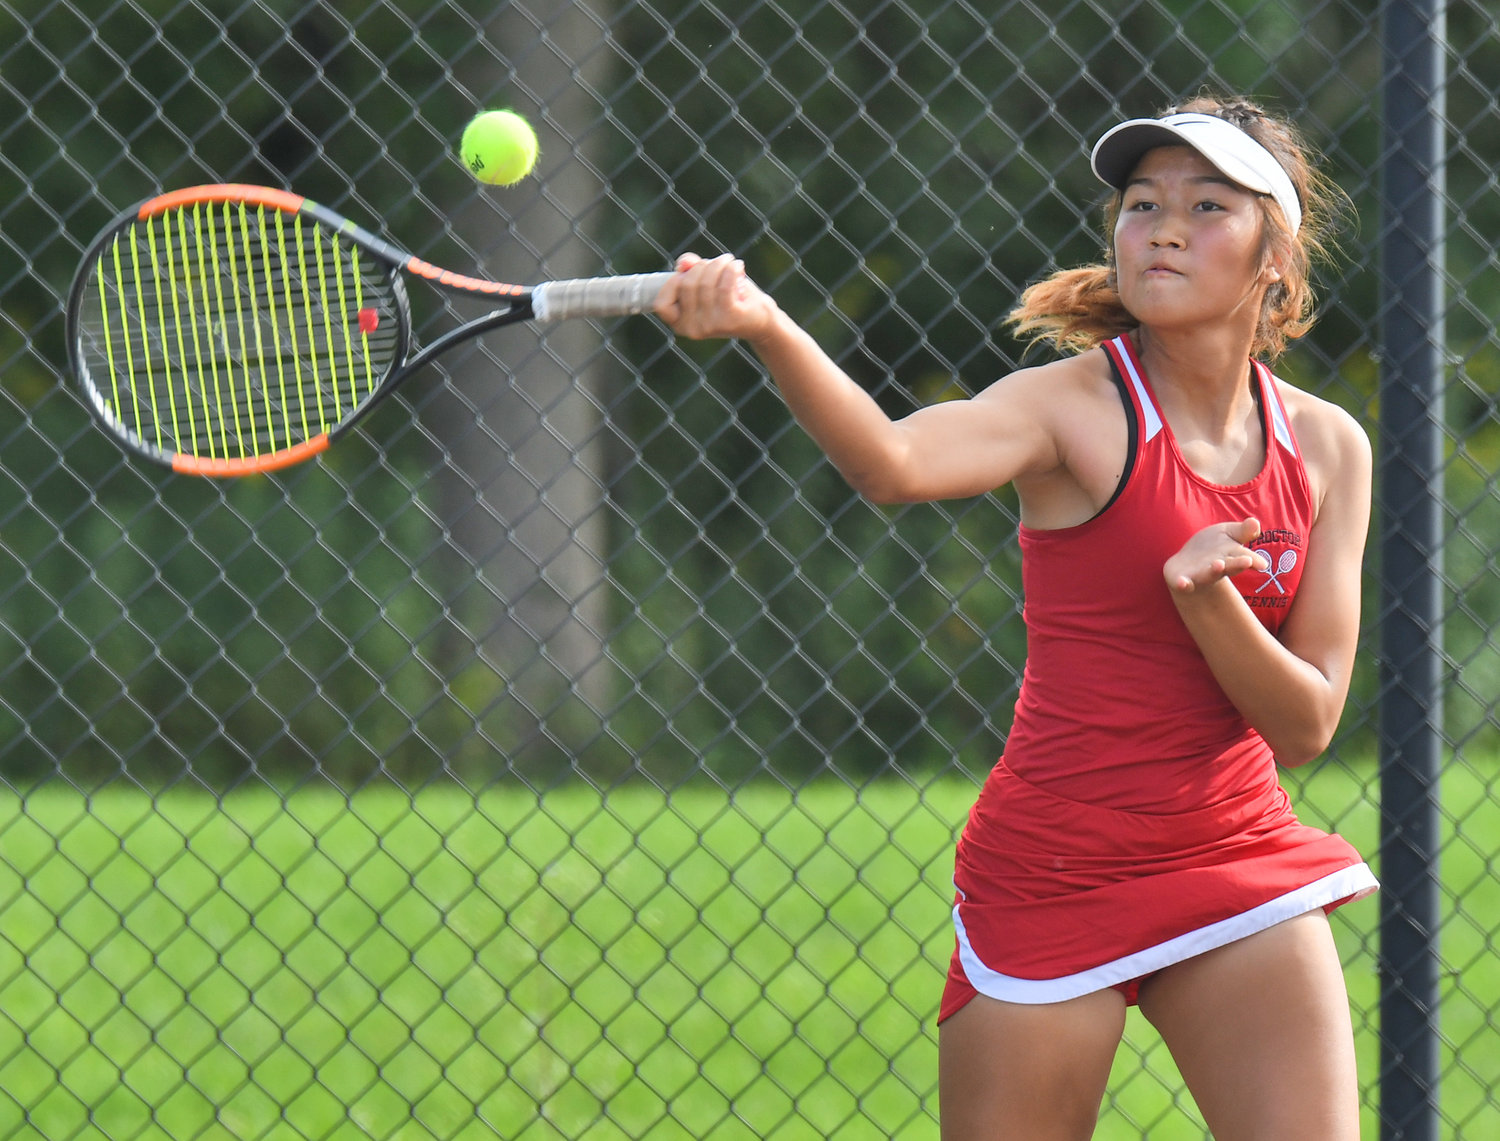 Utica-Proctor’s Tha Kyet returns shot in her first singles match against Rome Free Academy’s Jenna Cianfrocco at the RFA tennis courts Wednesday afternoon. Kyet won 6-1, 6-3 and the Raiders won the match 4-3.